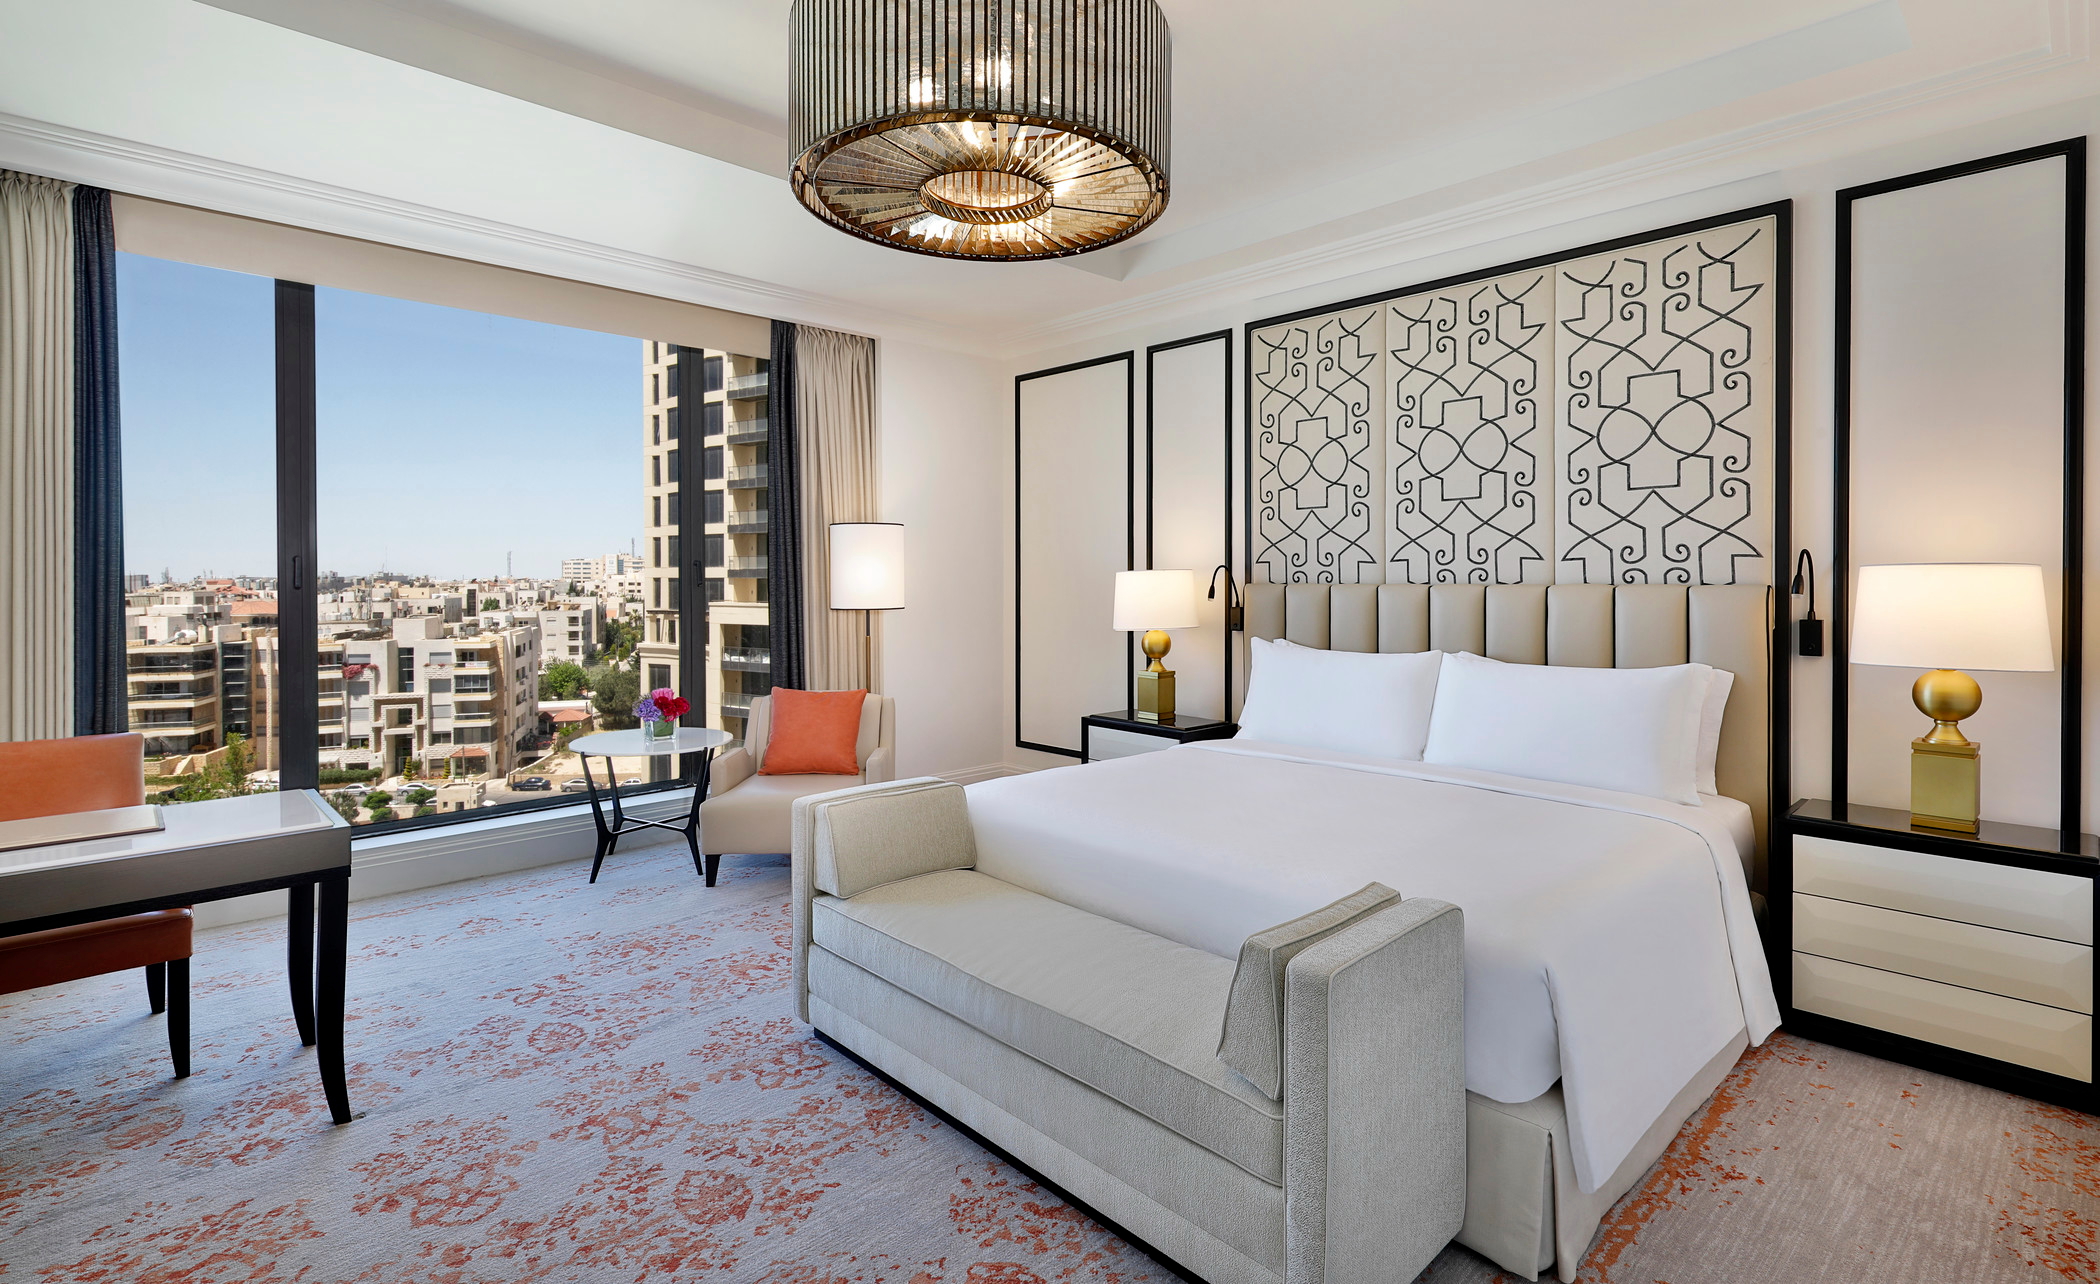 Luxurious room at the St. Regis Amman. Click to enlarge.